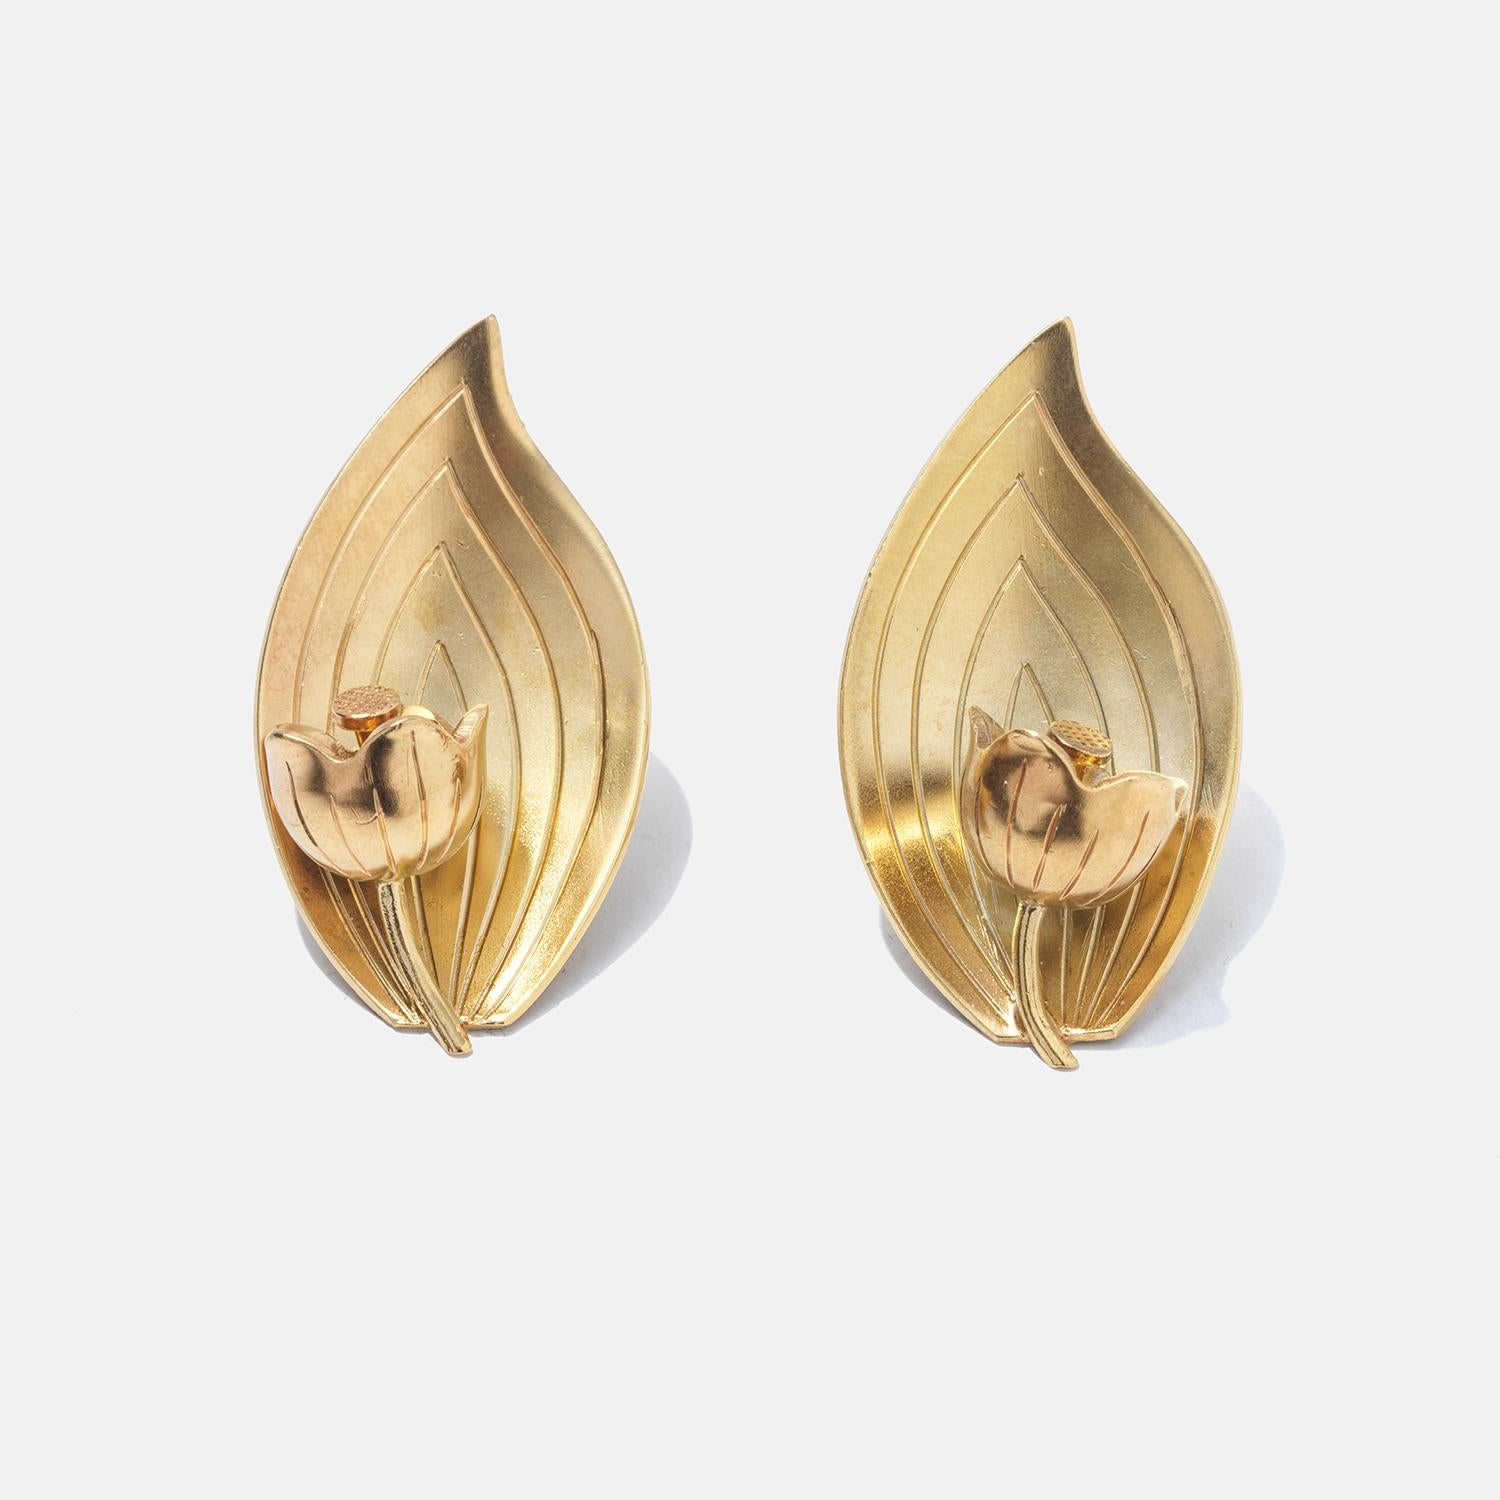 These gilded silver earrings showcase an elegant leaf and tulip design with a detailed, textured finish, offering an organic and refined aesthetic. The center of each leaf cradles a delicate tulip in bloom, adding a touch of floral elegance. They